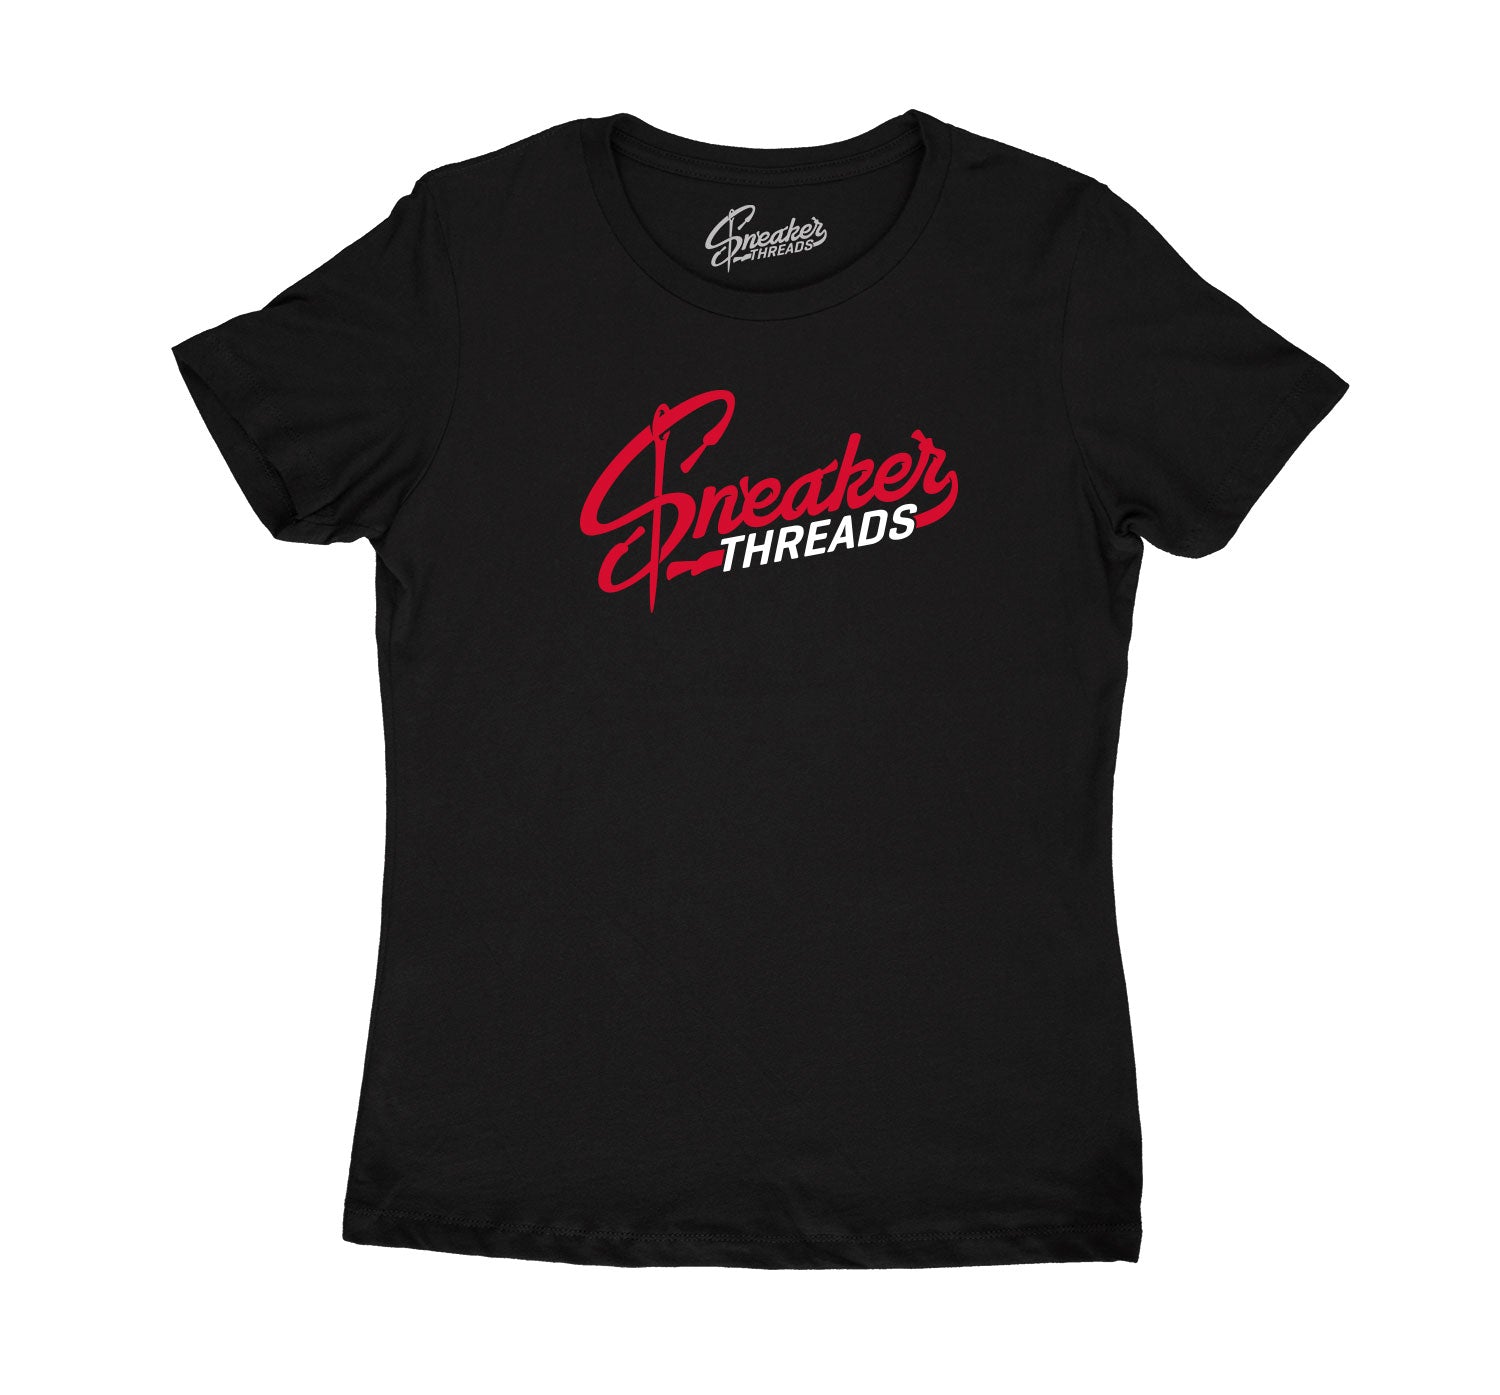 ladies t shirt collection made to match the gym red 9s